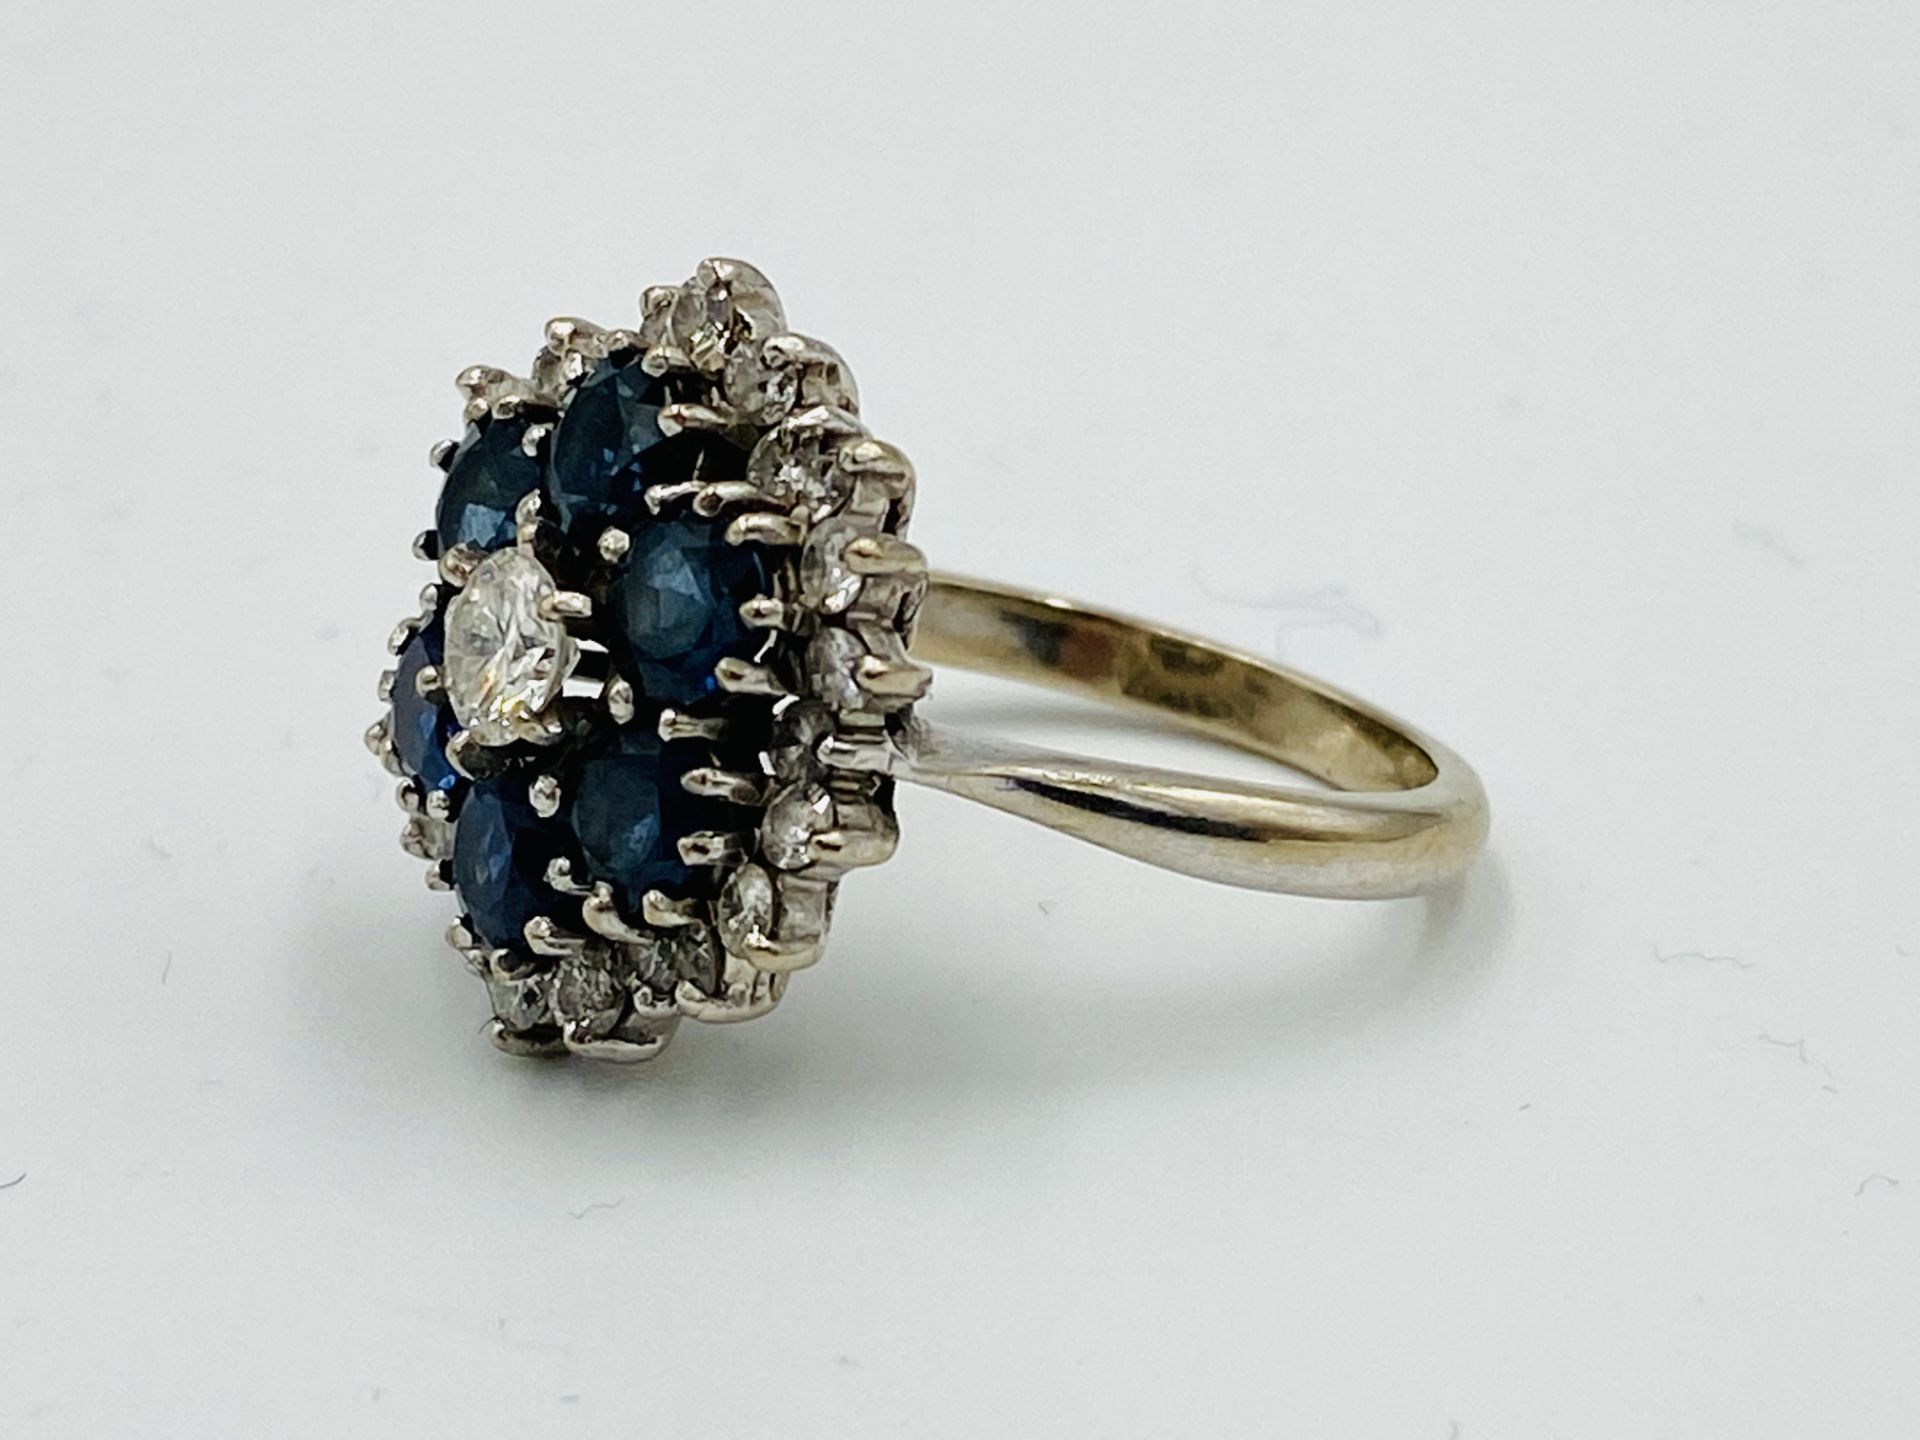 18ct gold, diamond and sapphire ring - Image 2 of 4